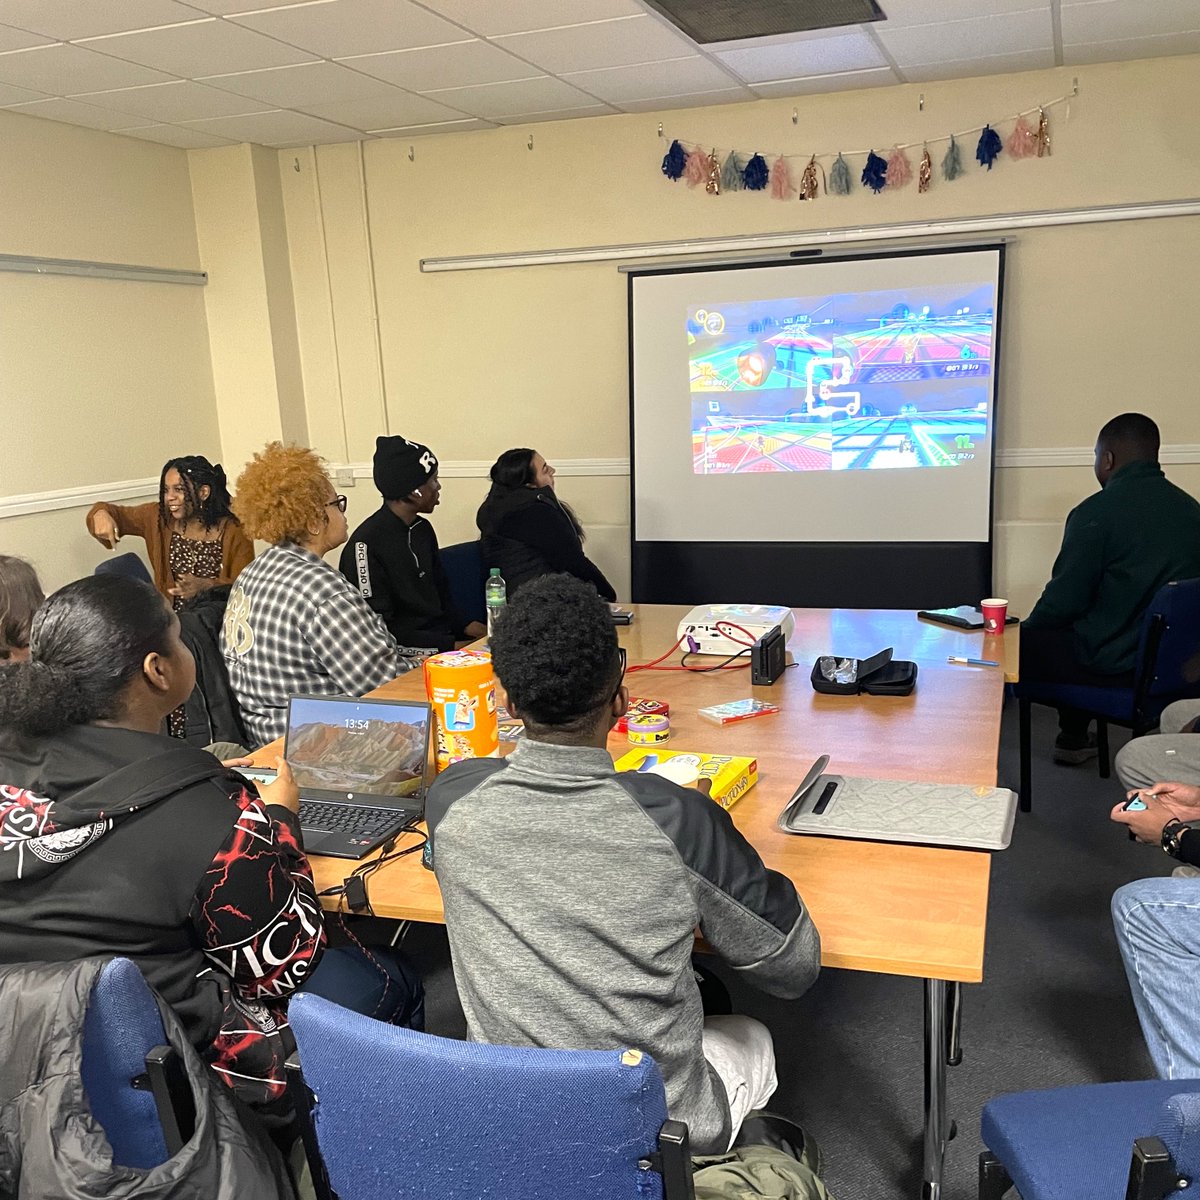 We had a great Games Night with our Young Adult Carers. We ate, played video and board games, and checked in with our Carers. There was some pretty impressive dancing when we broke out Just Dance!